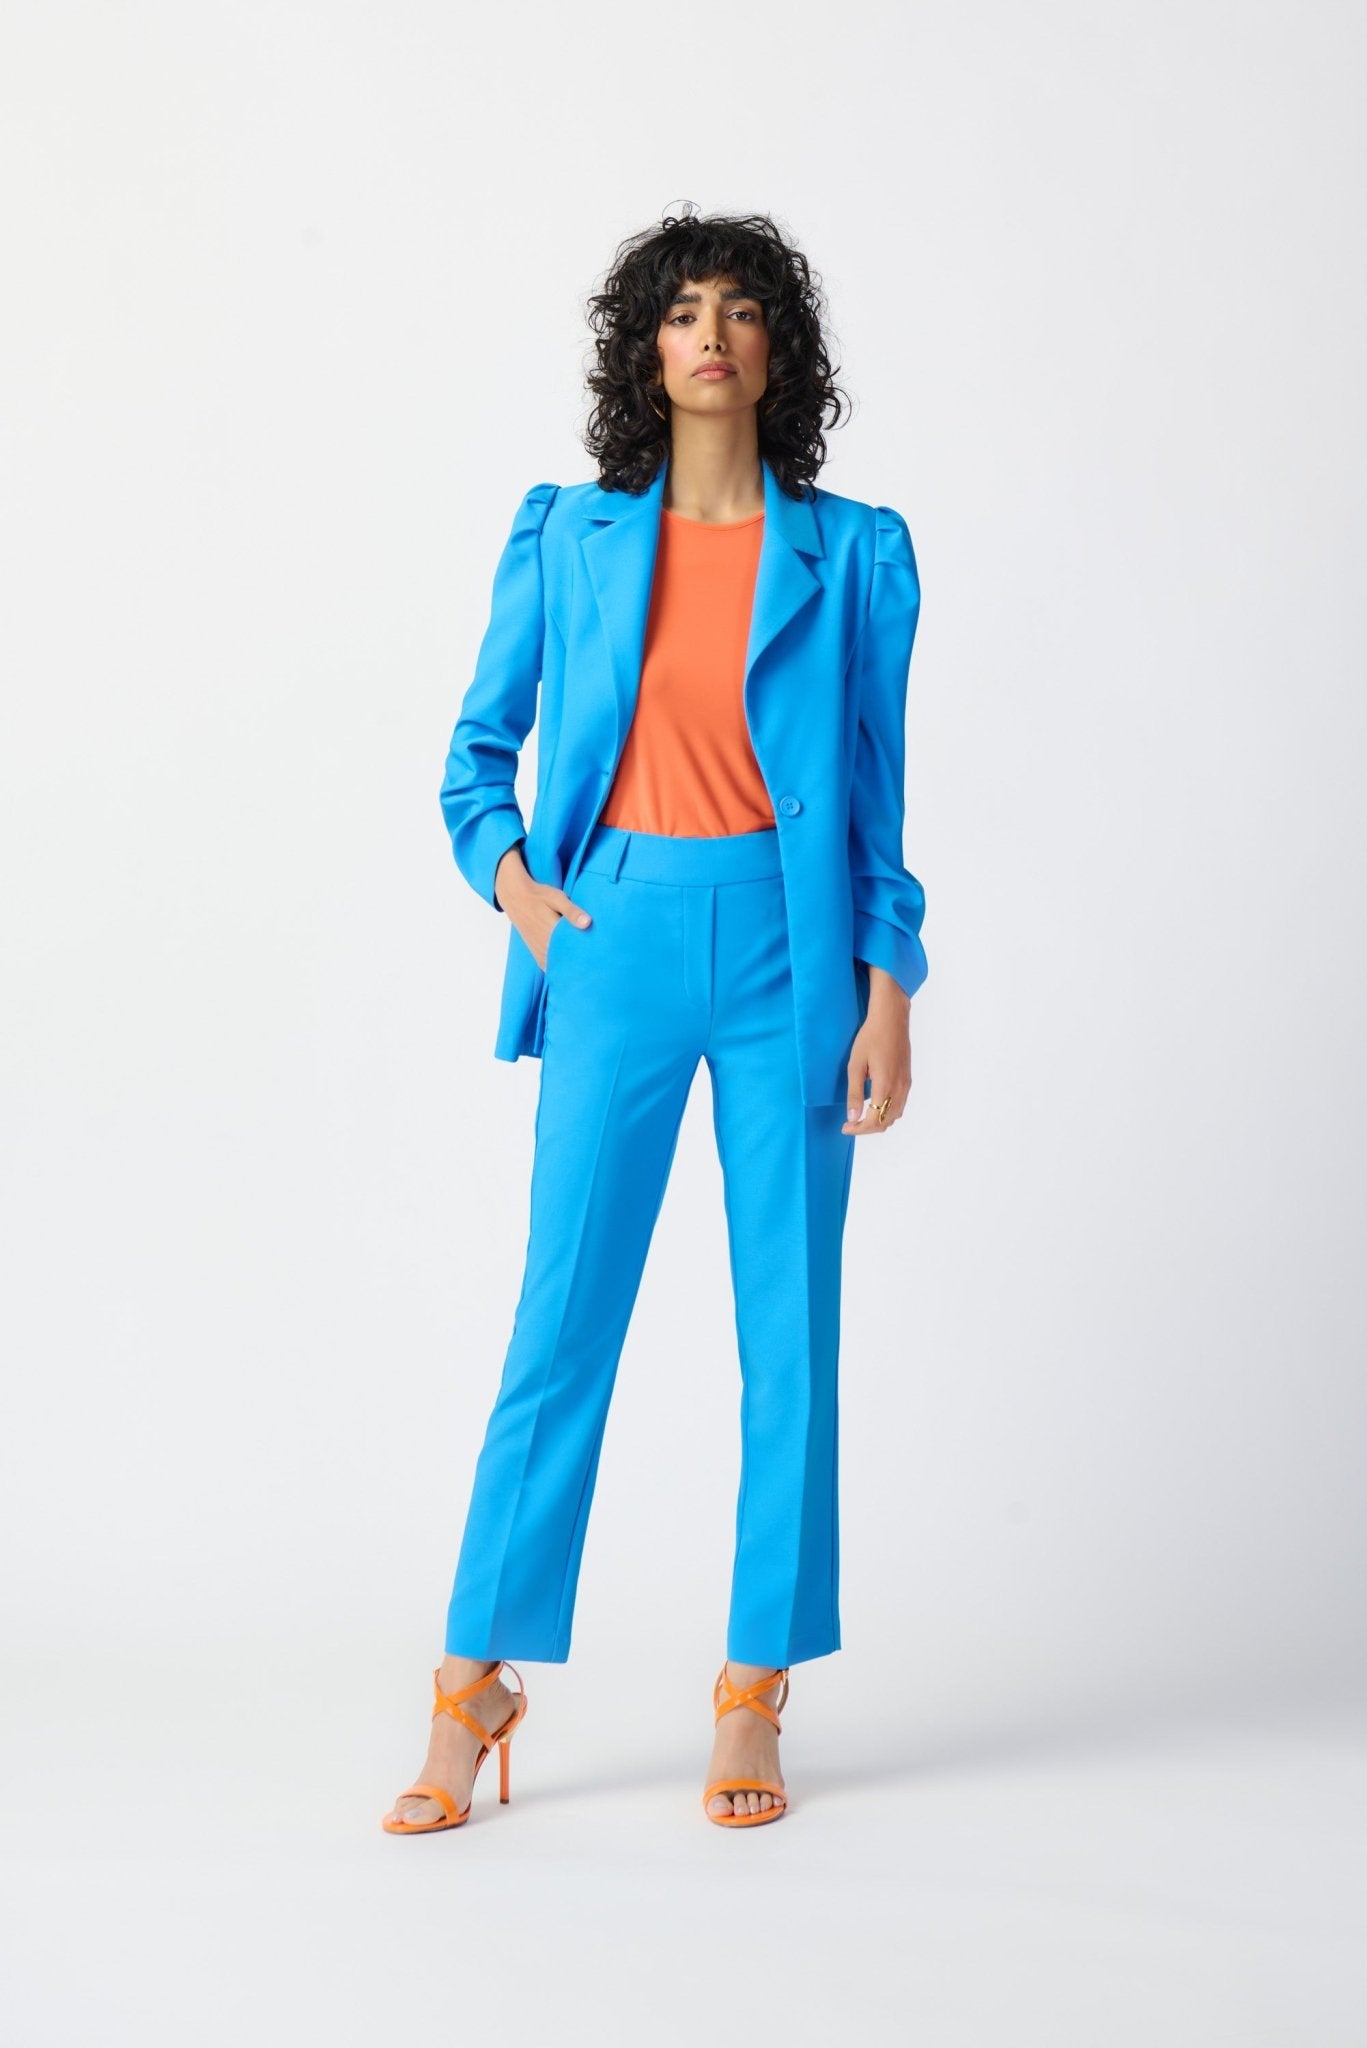 Shop Lux Twill Cropped Pants Style 241188 | French Blue - Joseph Ribkoff